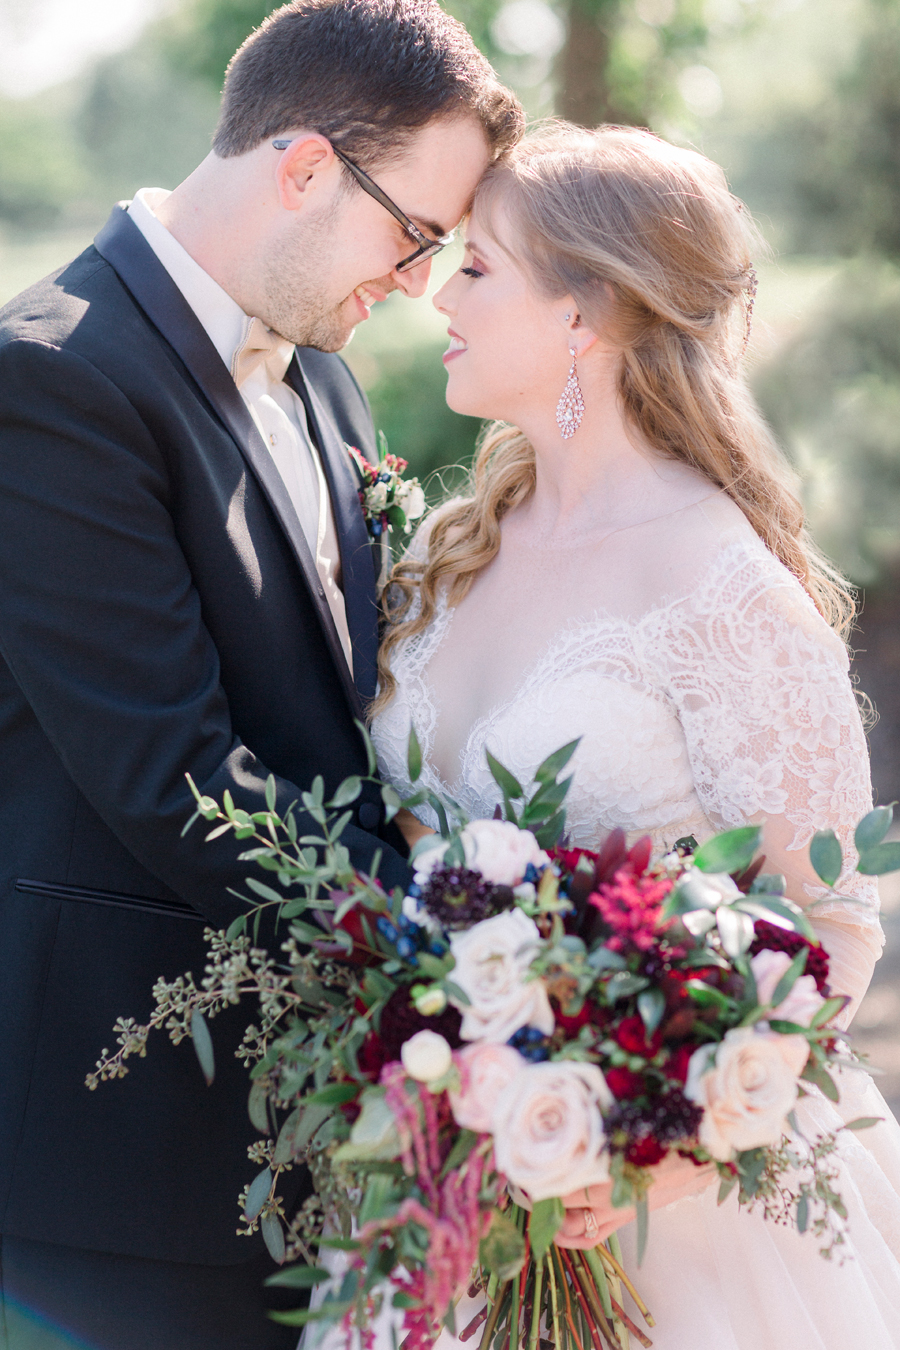 A wedding at Columbia Country Club photographed by Missouri photographer Love Tree Studios.